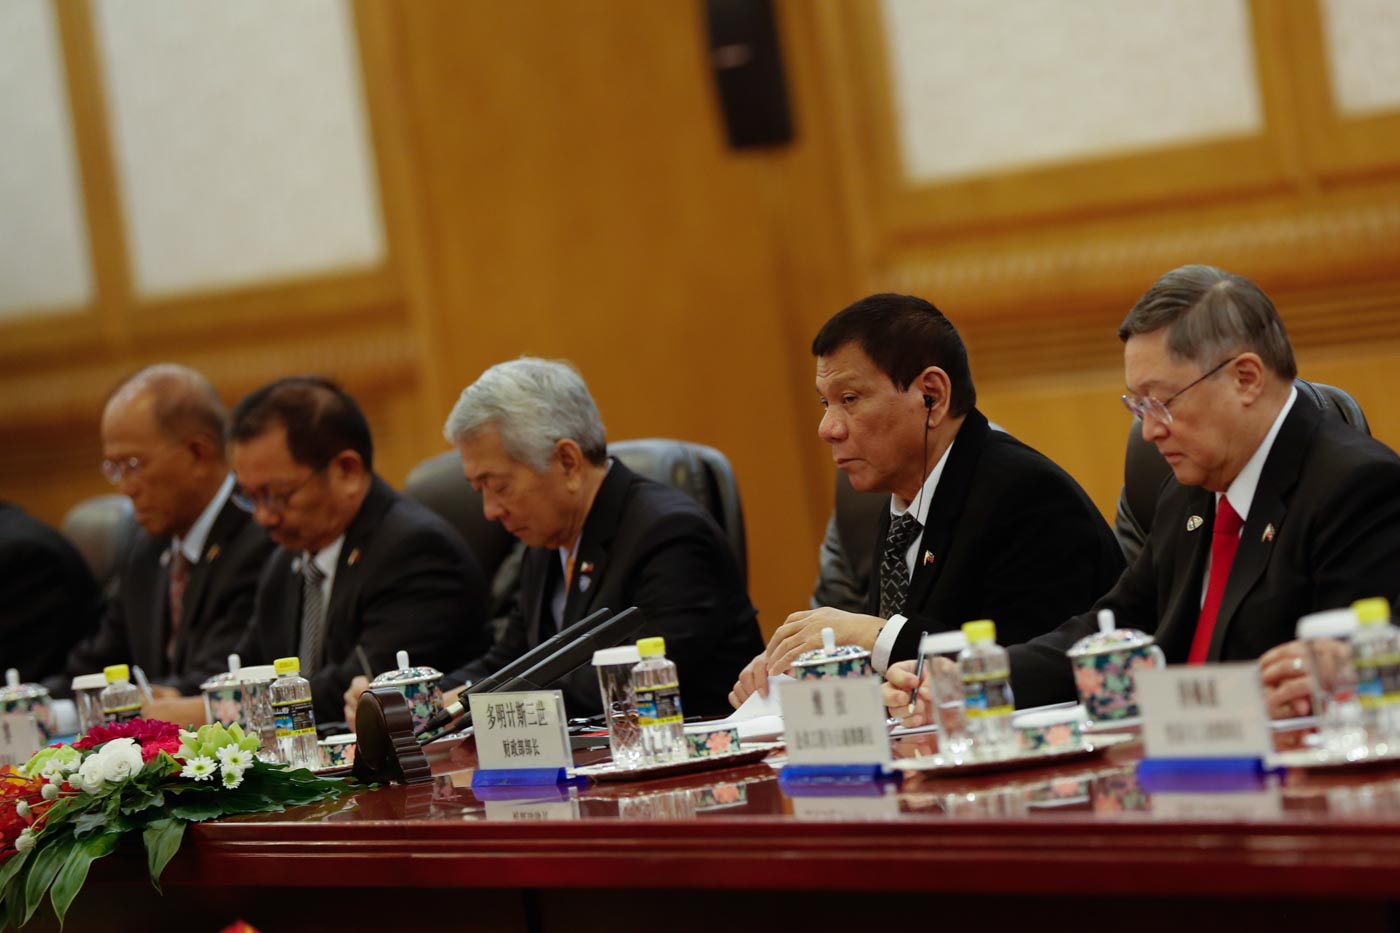 DUTERTE IN CHINA. President Rodrigo Duterte listens to the English translation of the discussions during the bilateral meeting with top government officials of China at the Great Hall of the People in Beijing, China on October 20. Photo by Toto Lozano/PPD 